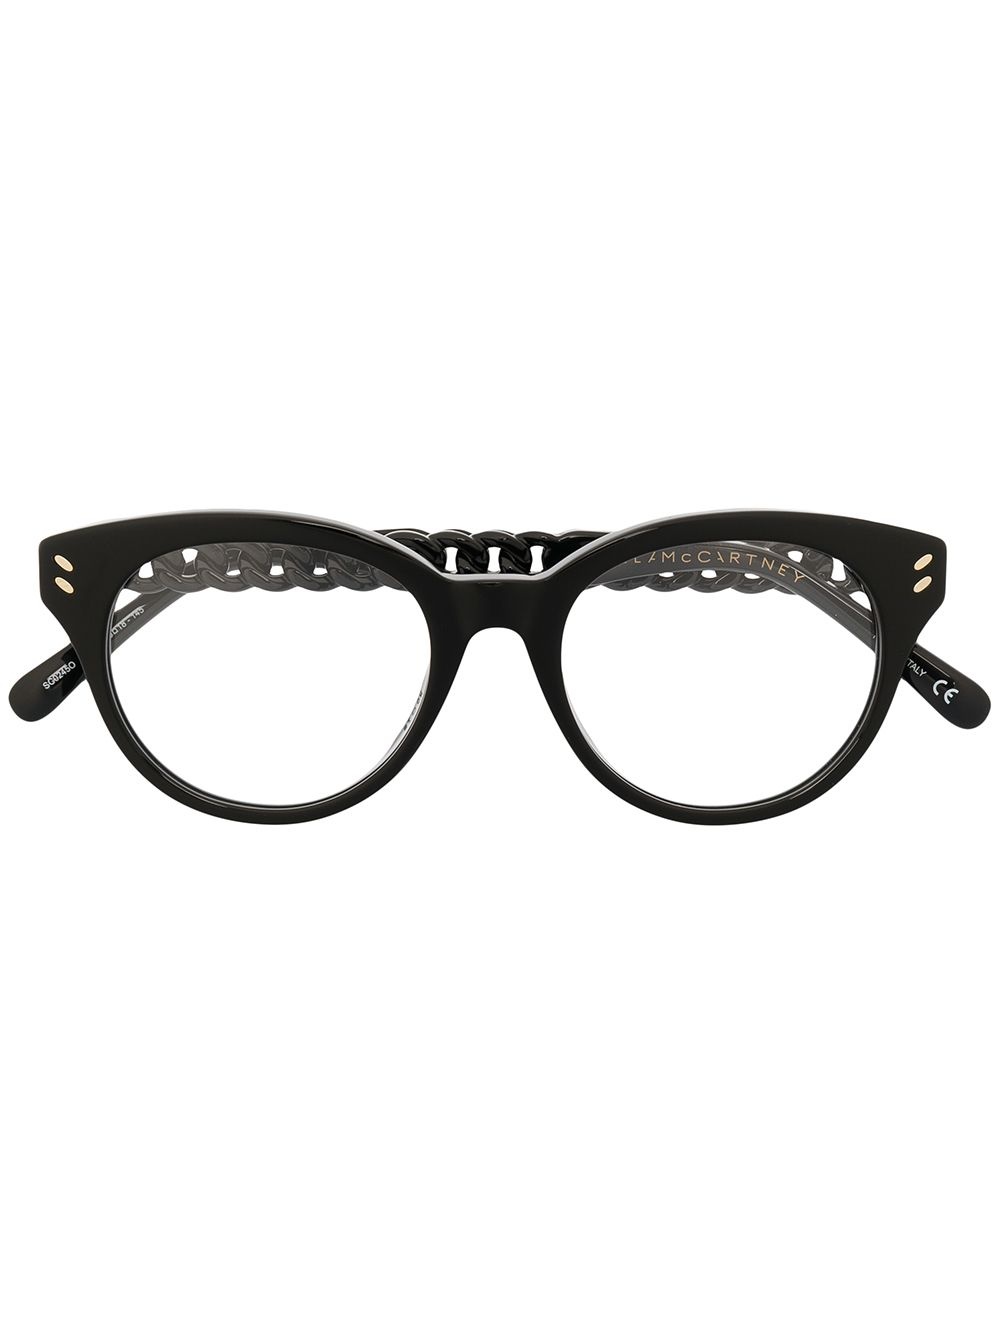 chain-effect round frame glasses - 1